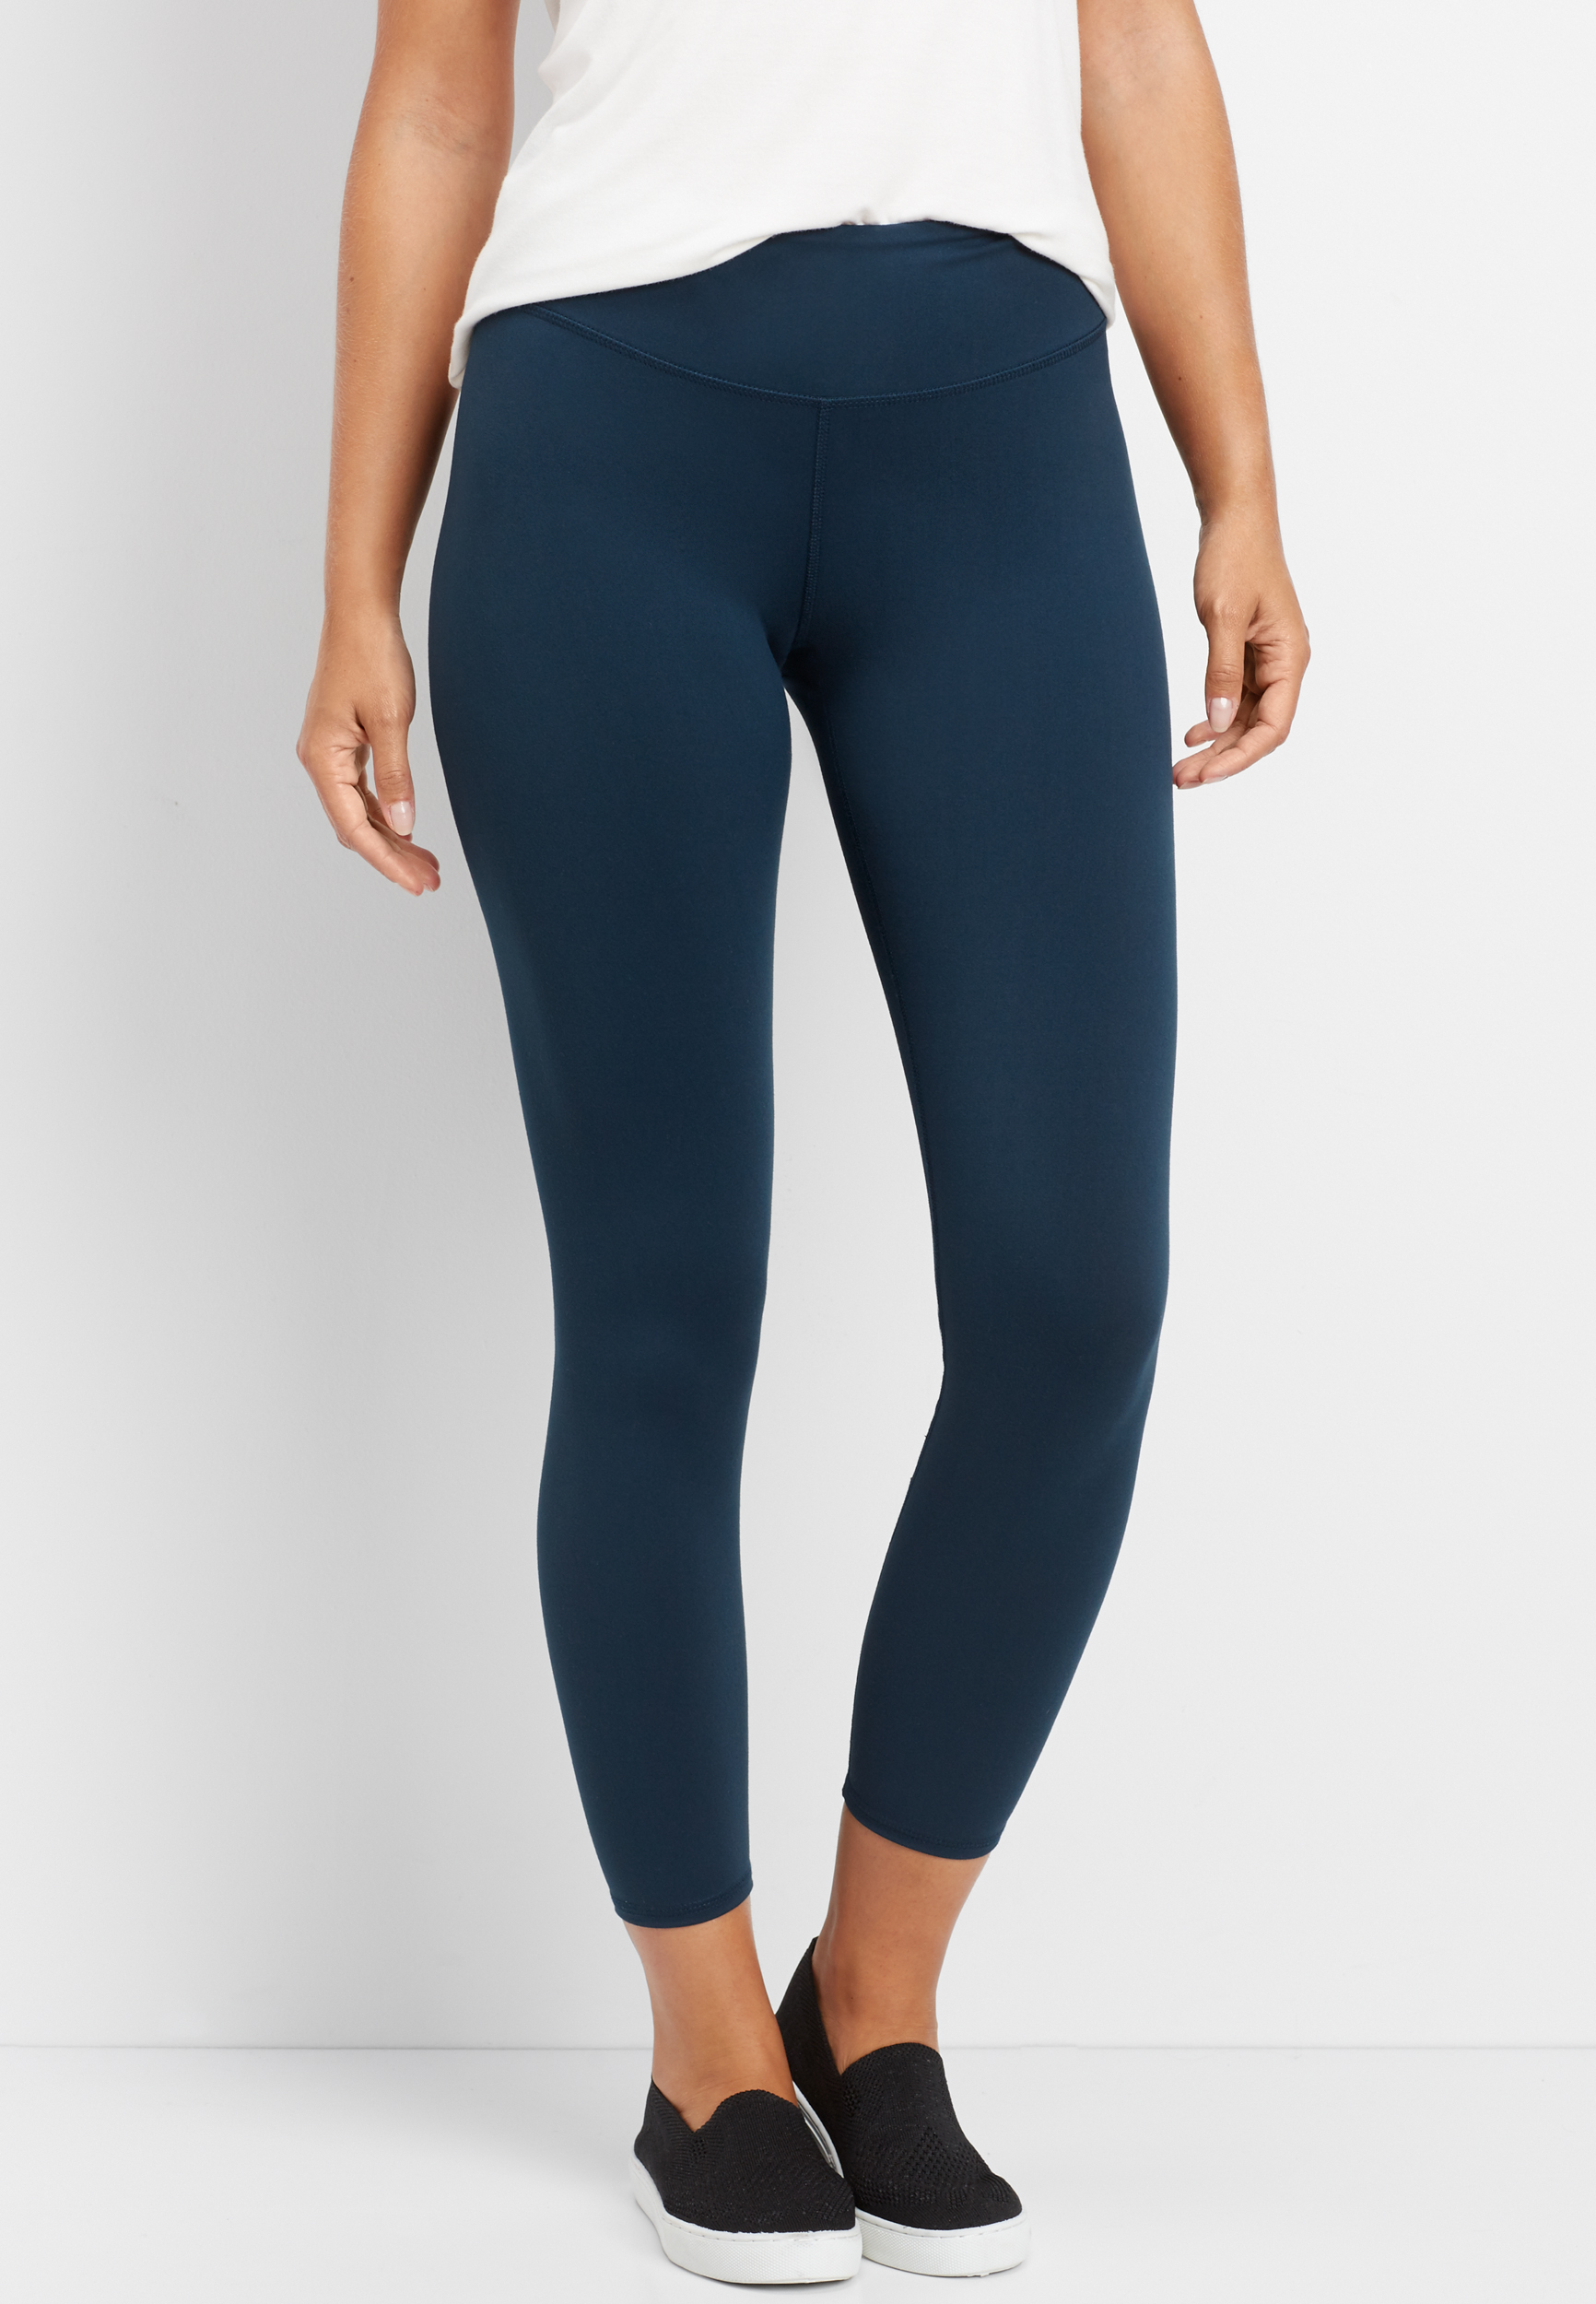 teal high rise 7/8 active legging | maurices